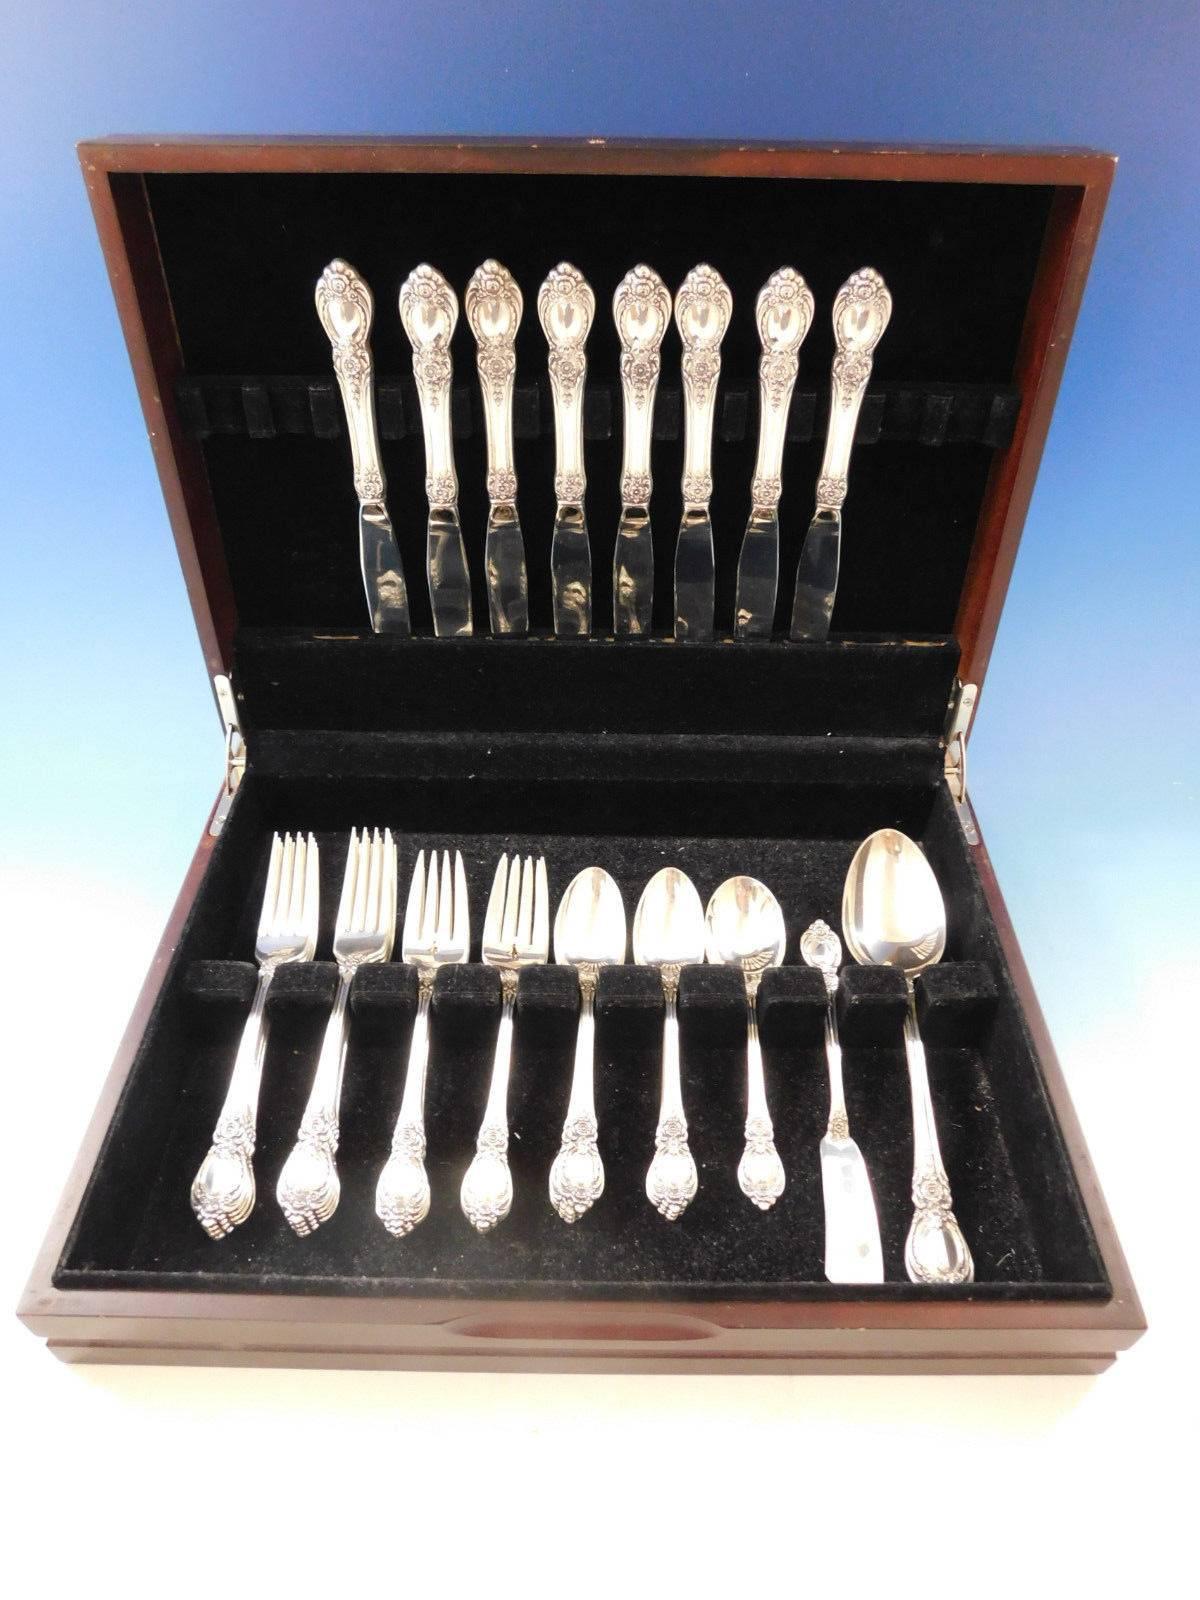 Lovely Stanton Hall by Oneida Sterling silver Flatware set, 35 pieces. This set includes:

Eight knives, 8 7/8